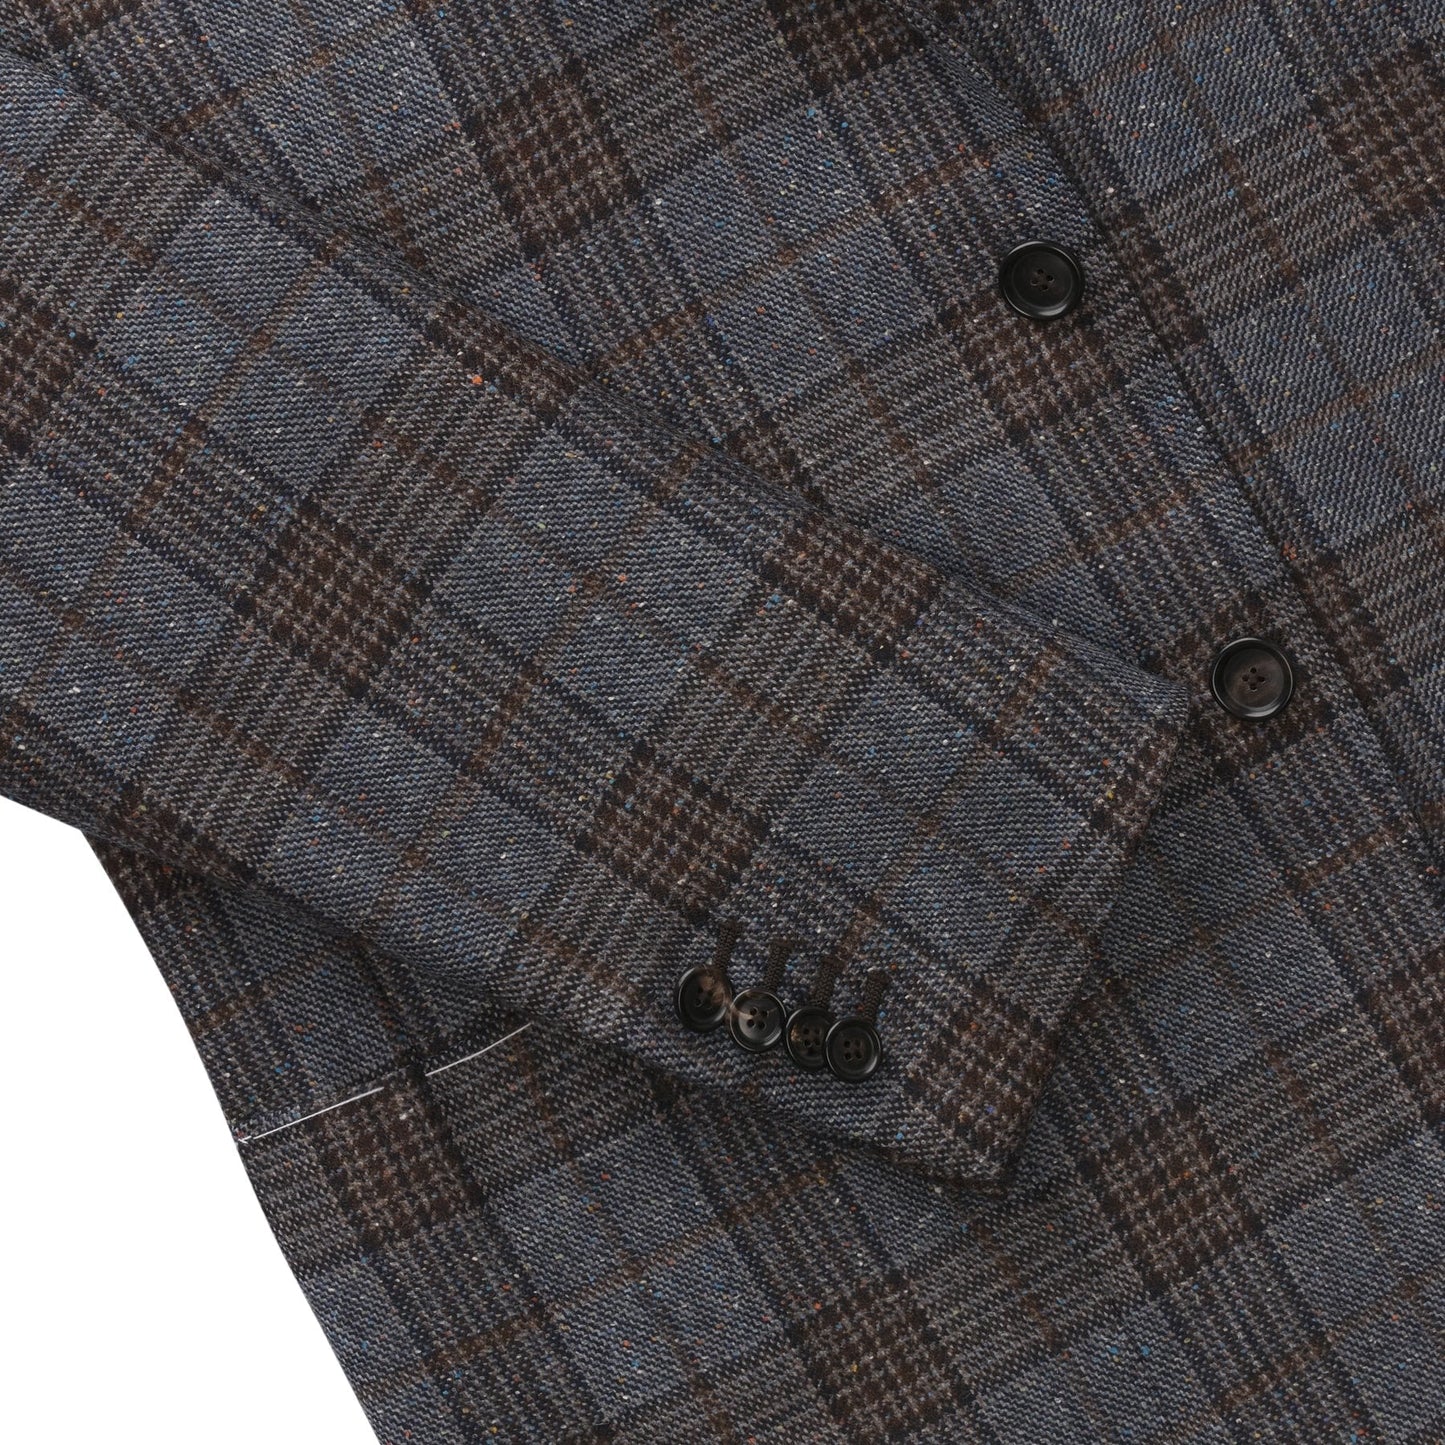 De Petrillo Single-Breasted Glencheck Wool and Silk-Blend Jacket in Light Blue. Exclusively Made for Sartale - SARTALE